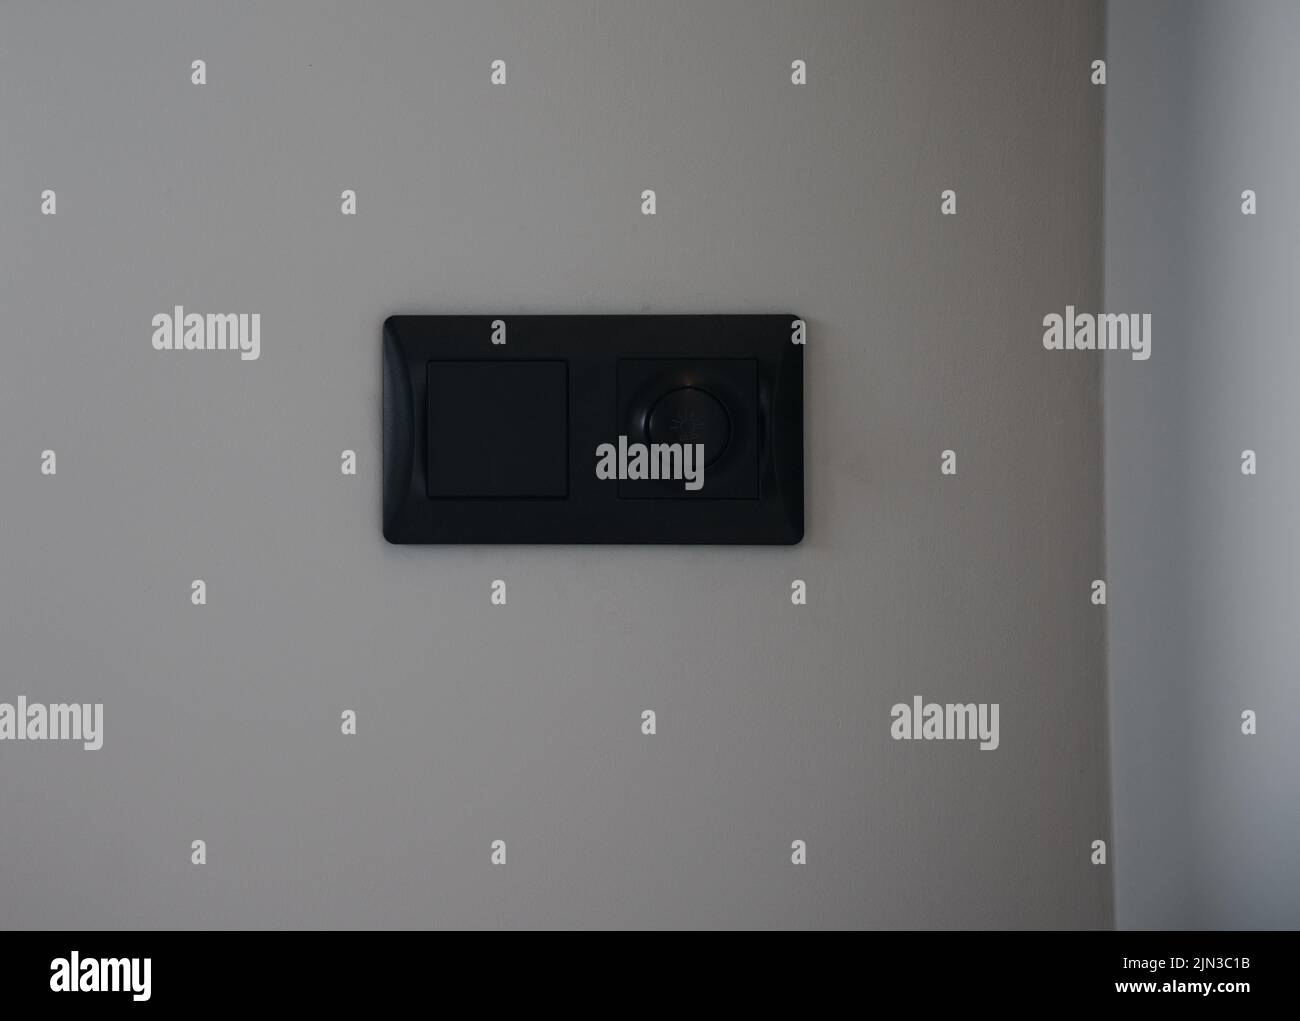 Black modern light switch and light dimmer on gray wall with copy space Stock Photo